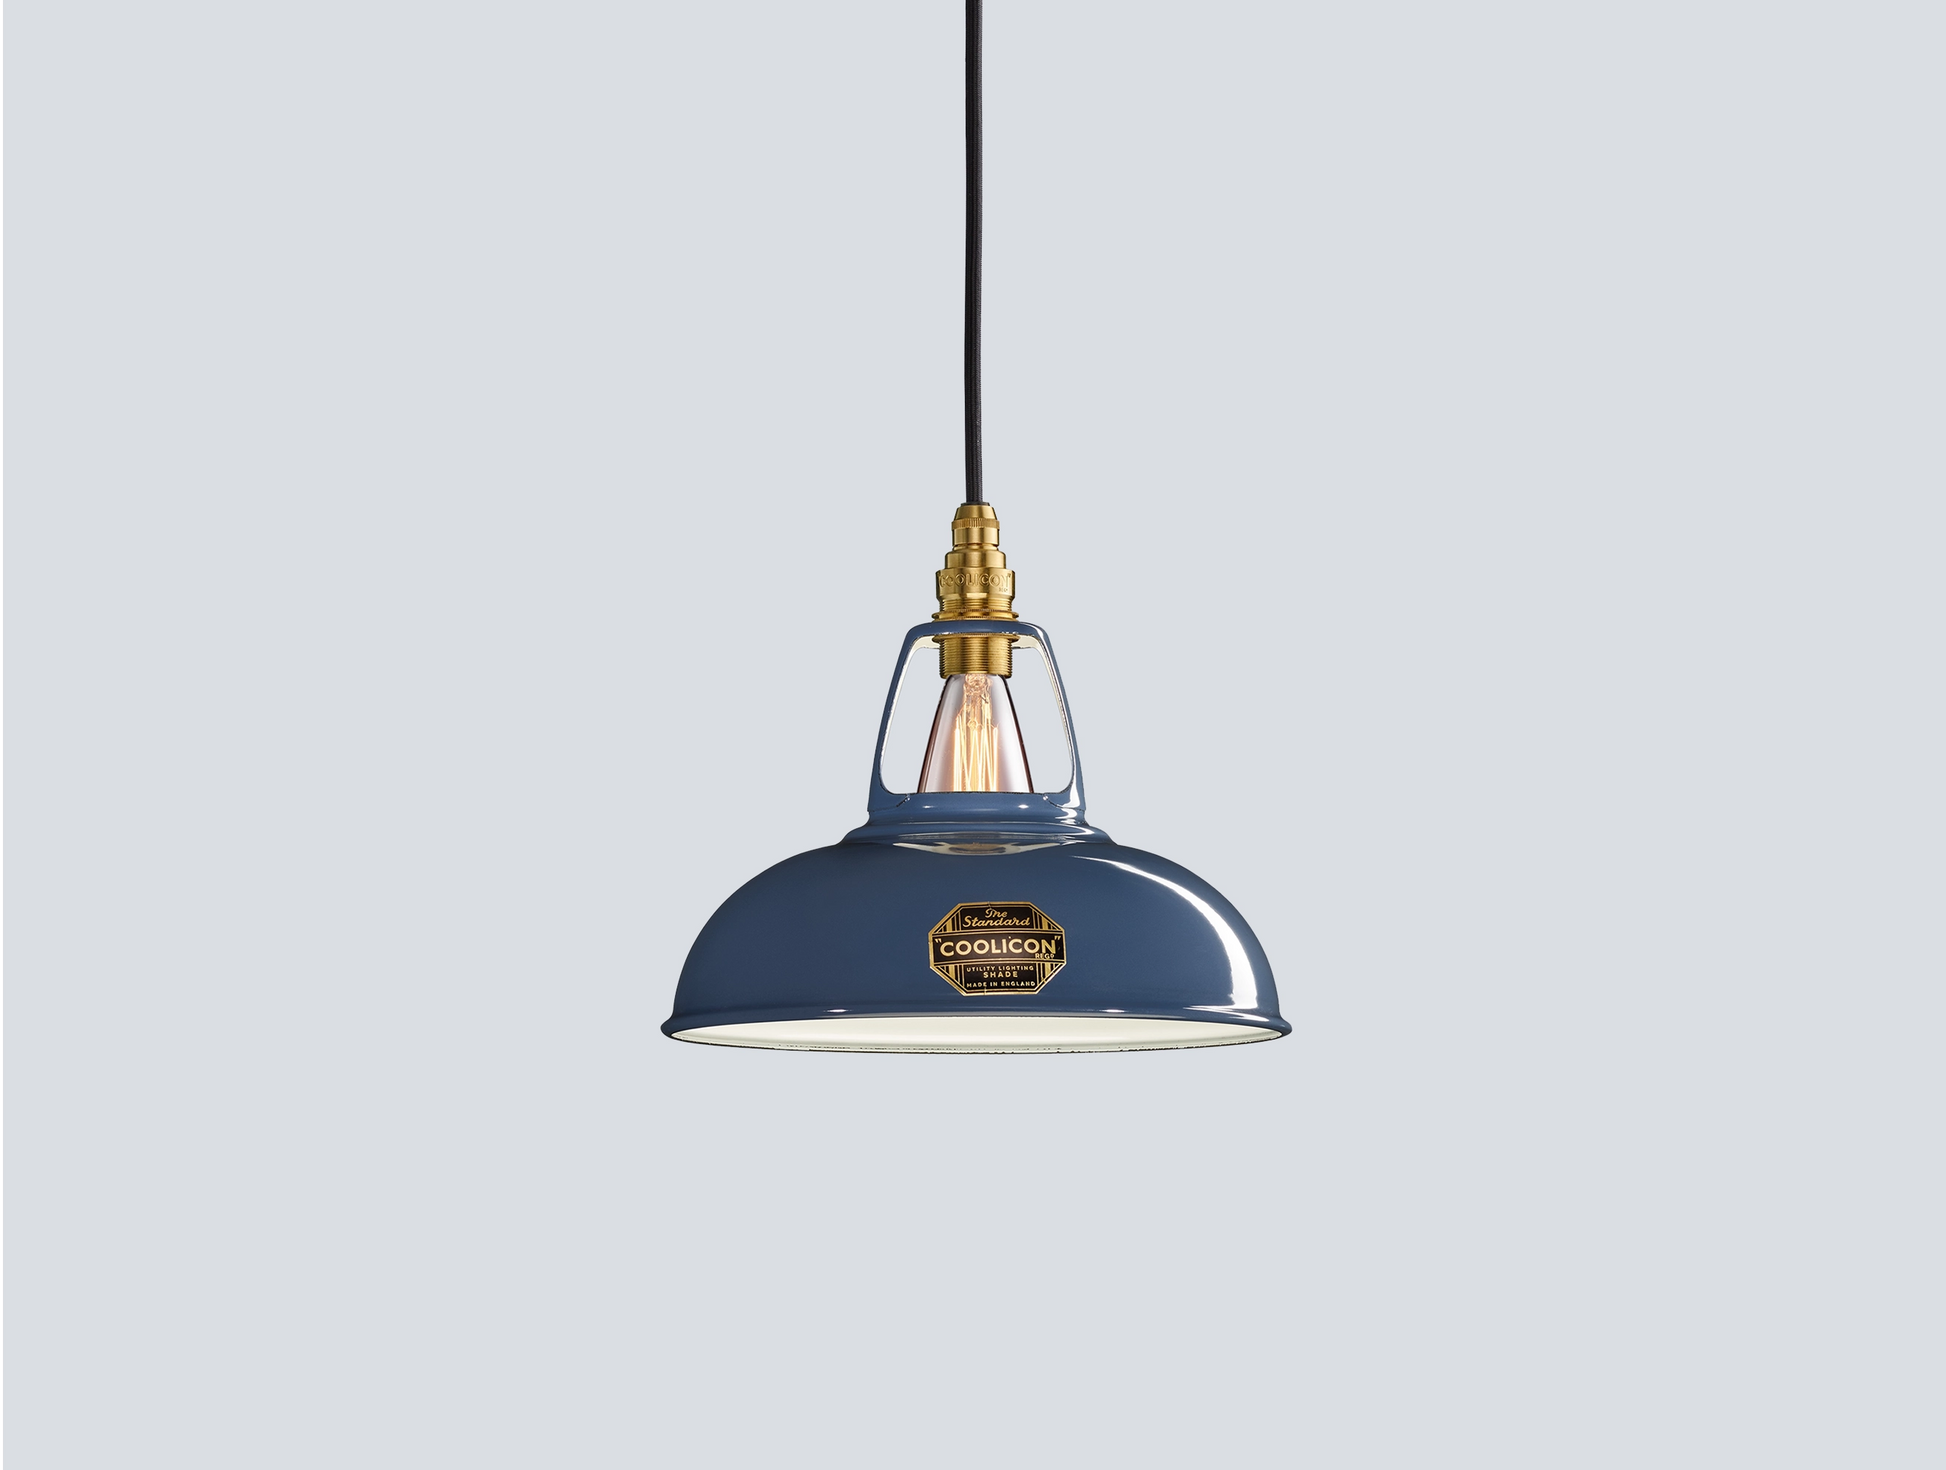 Selvedge blue Coolicon lampshade with a Signature Brass pendant set over a light blue background